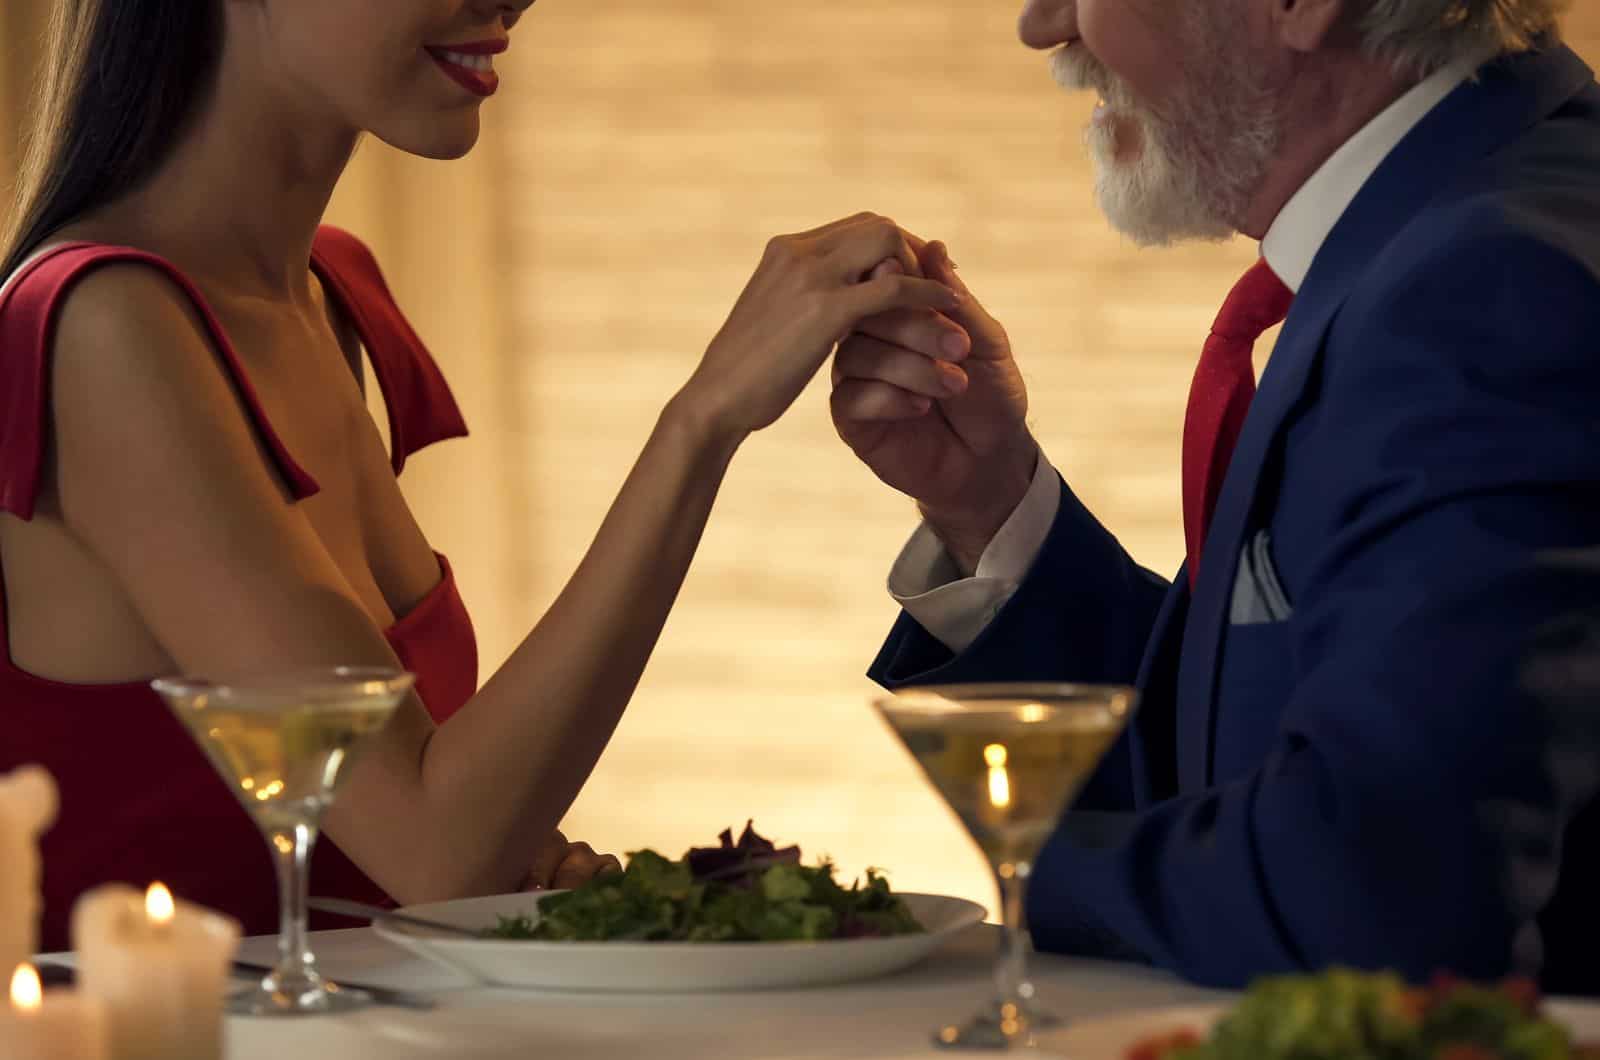 woman and older man on date